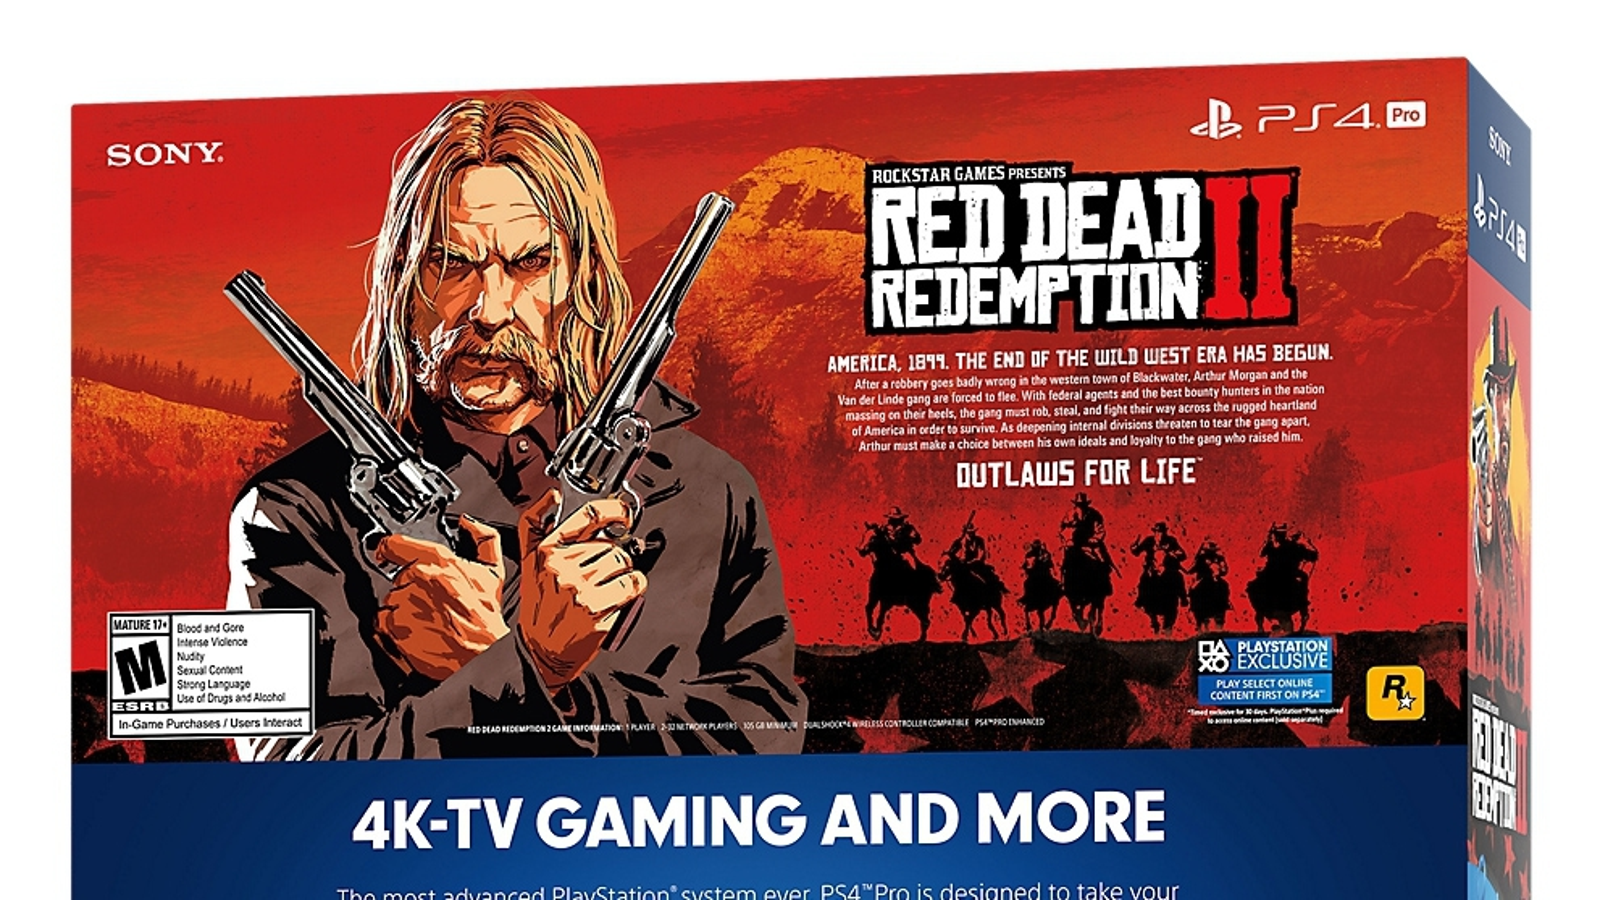 Red Dead Redemption 2 PC requirements ask for 150GB of storage